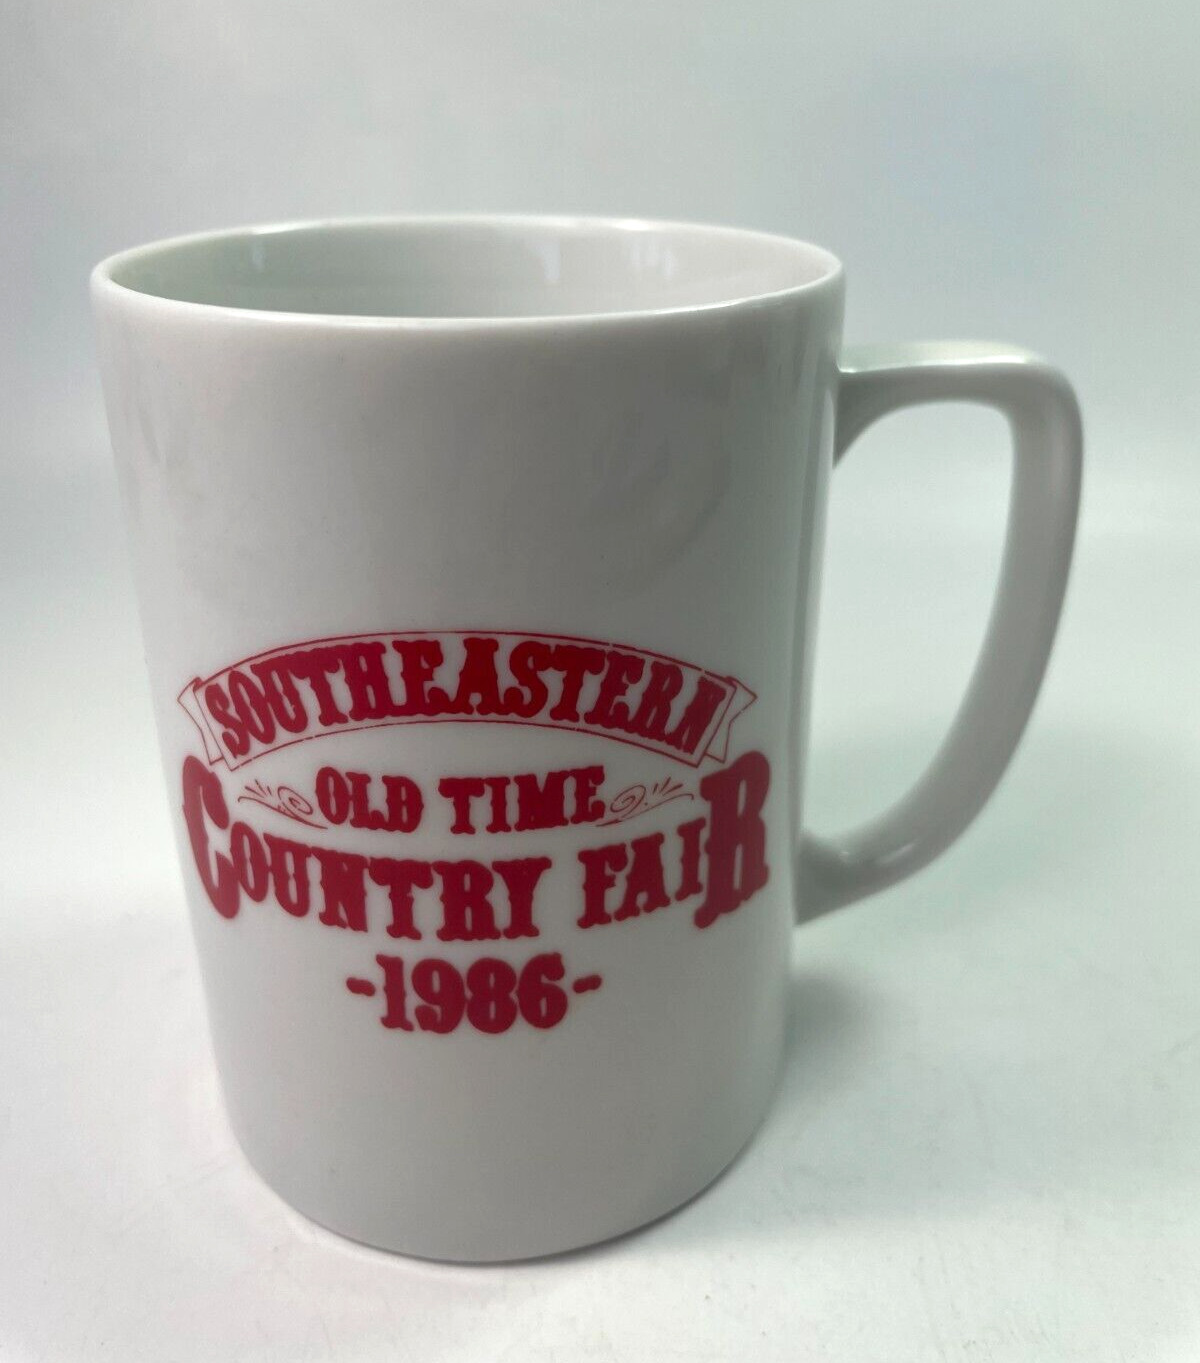 Vintage Country Fair Mug Southeastern Old Time 1986 10oz Excellent Rare Cup B43